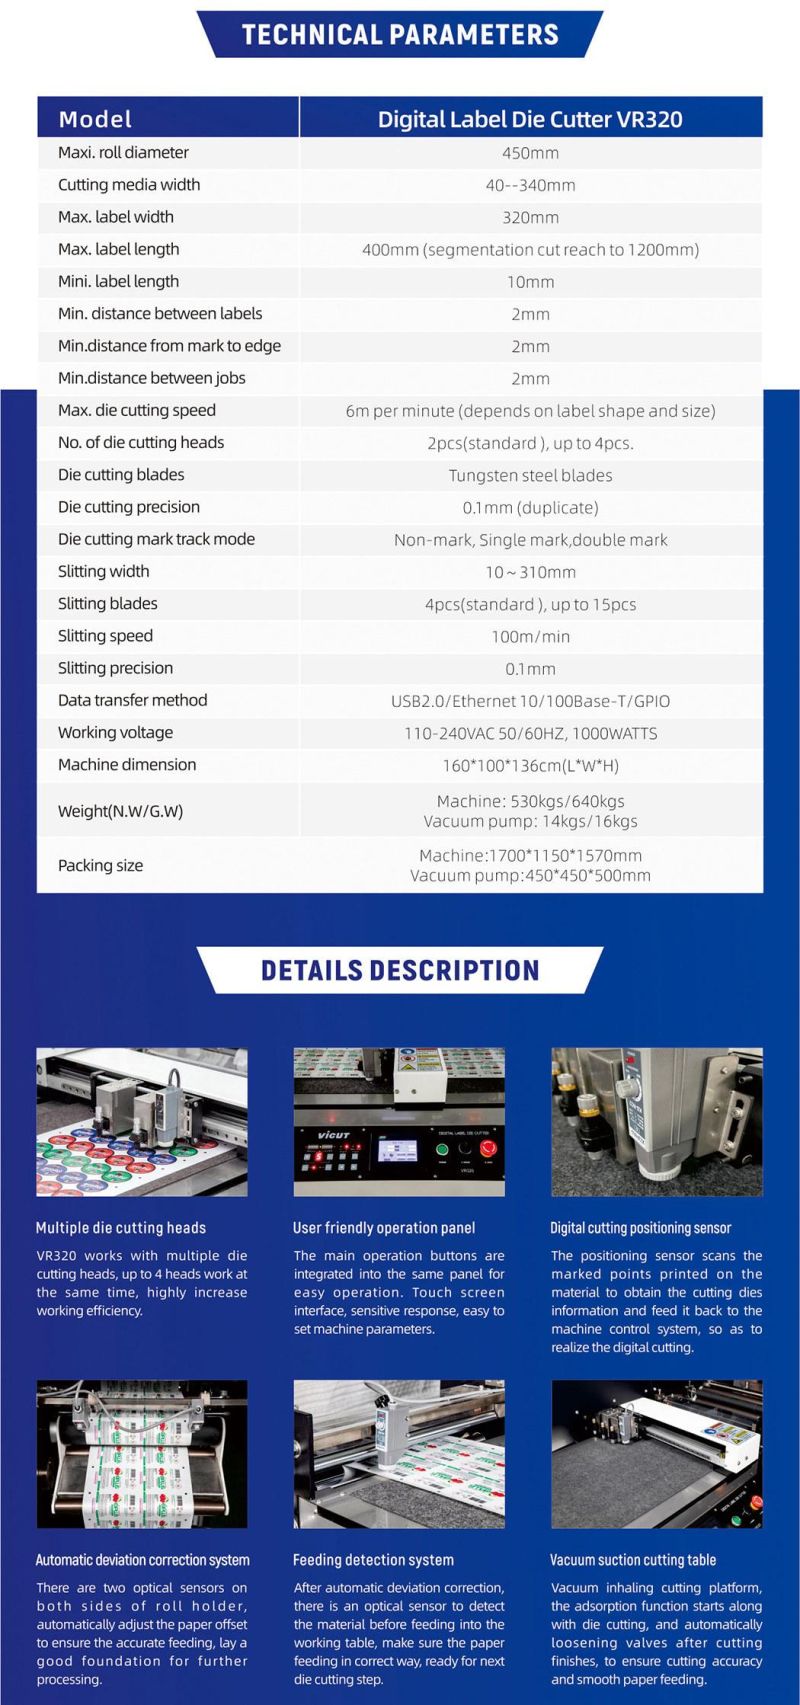 Vicut Roll 2 Roll Vinyl Digital Label Die Cutter/Automatic Contour Label Cutter with Laminator and Slitter